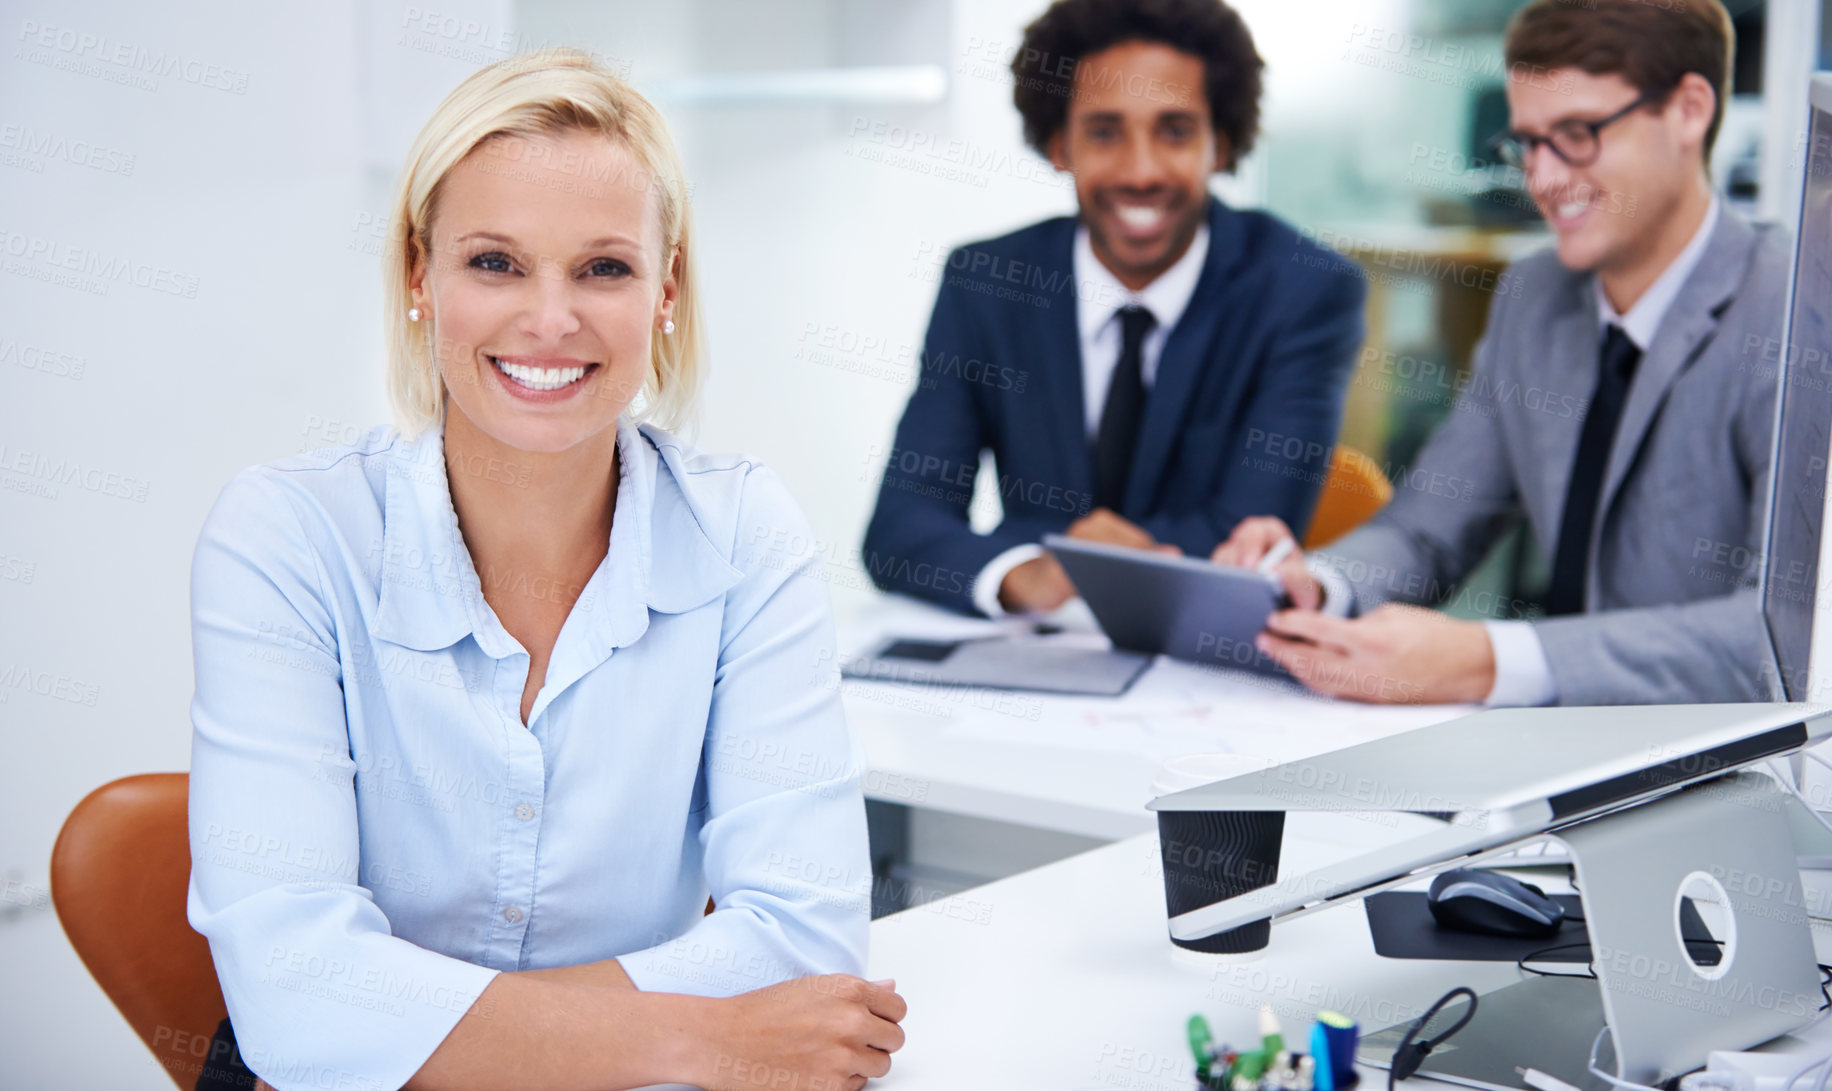 Buy stock photo Portrait of a confident businesswoman sitting with her colleagues in the background